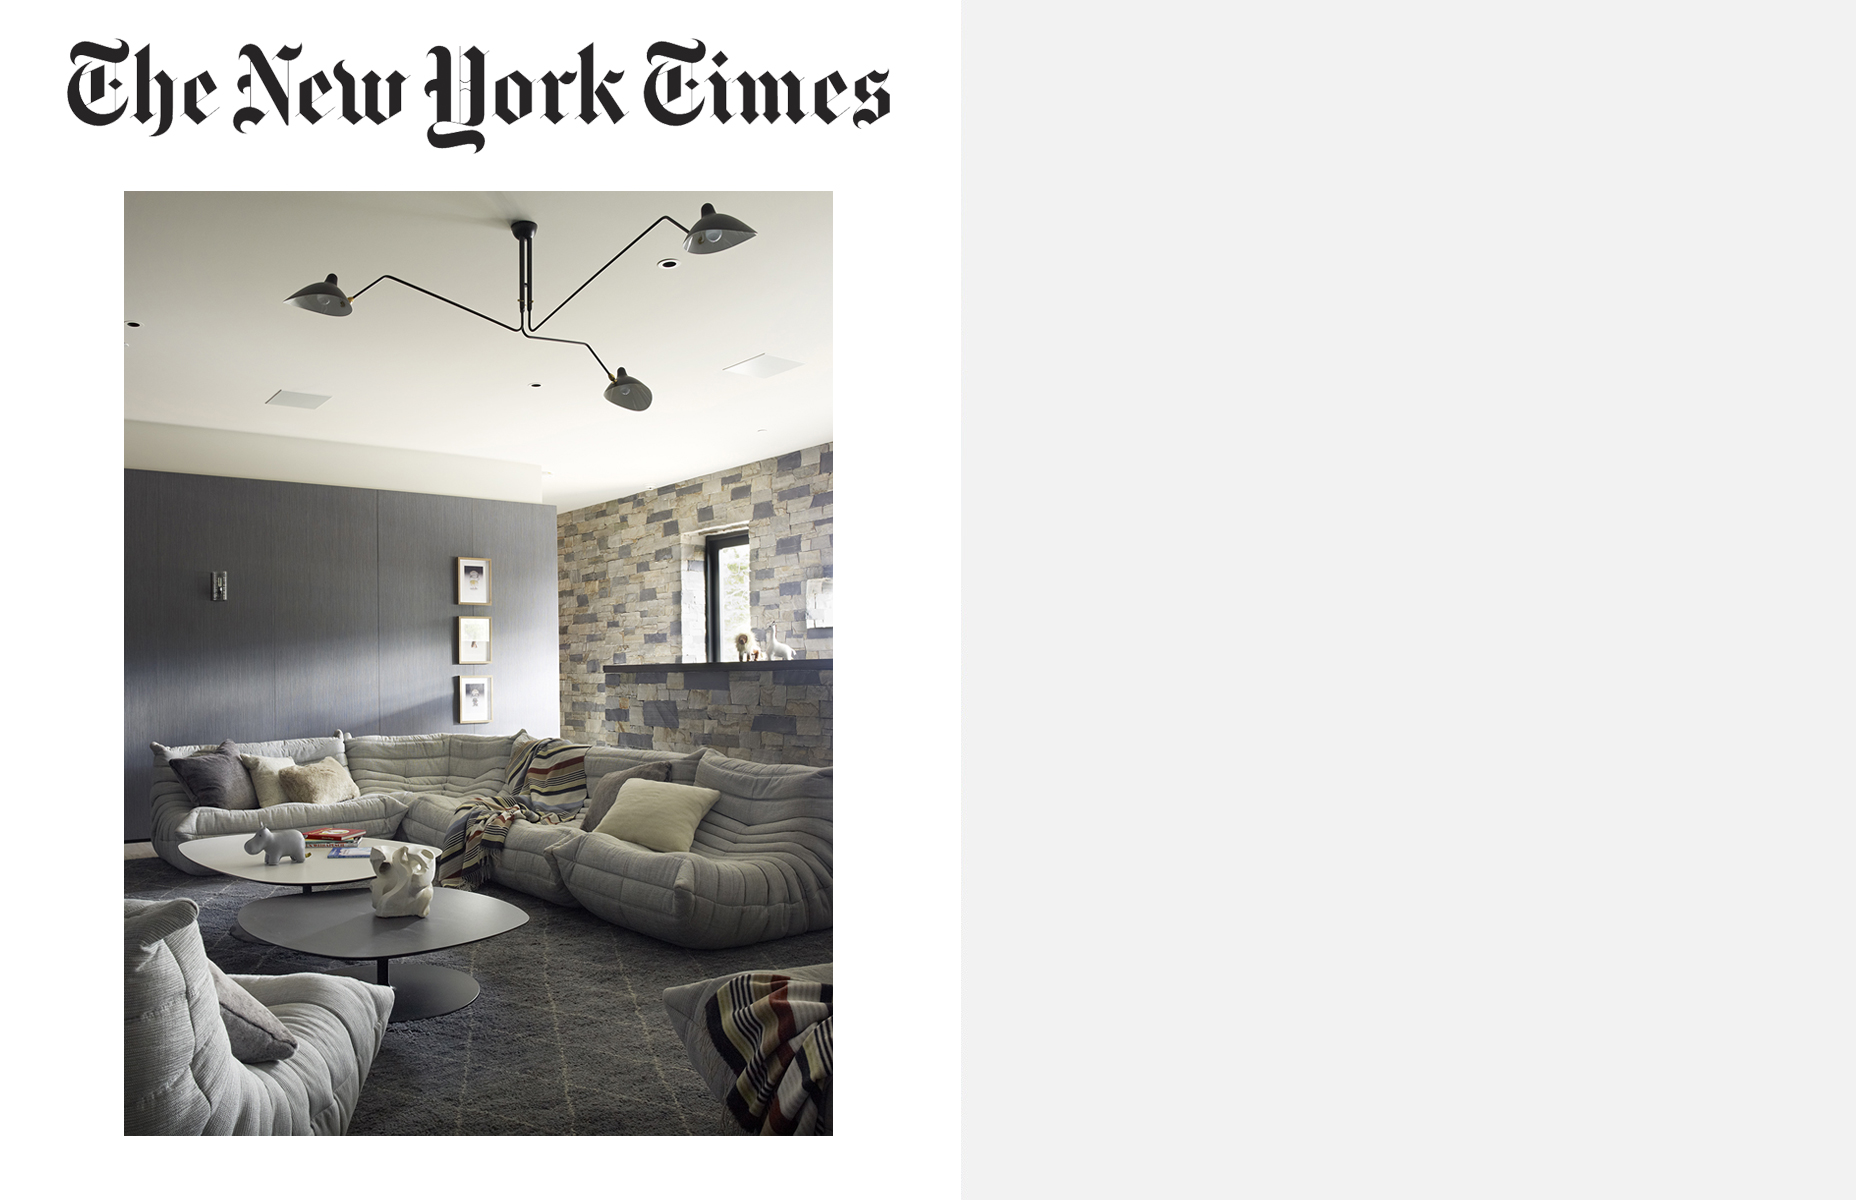 19-08-nytimes-cover.jpg